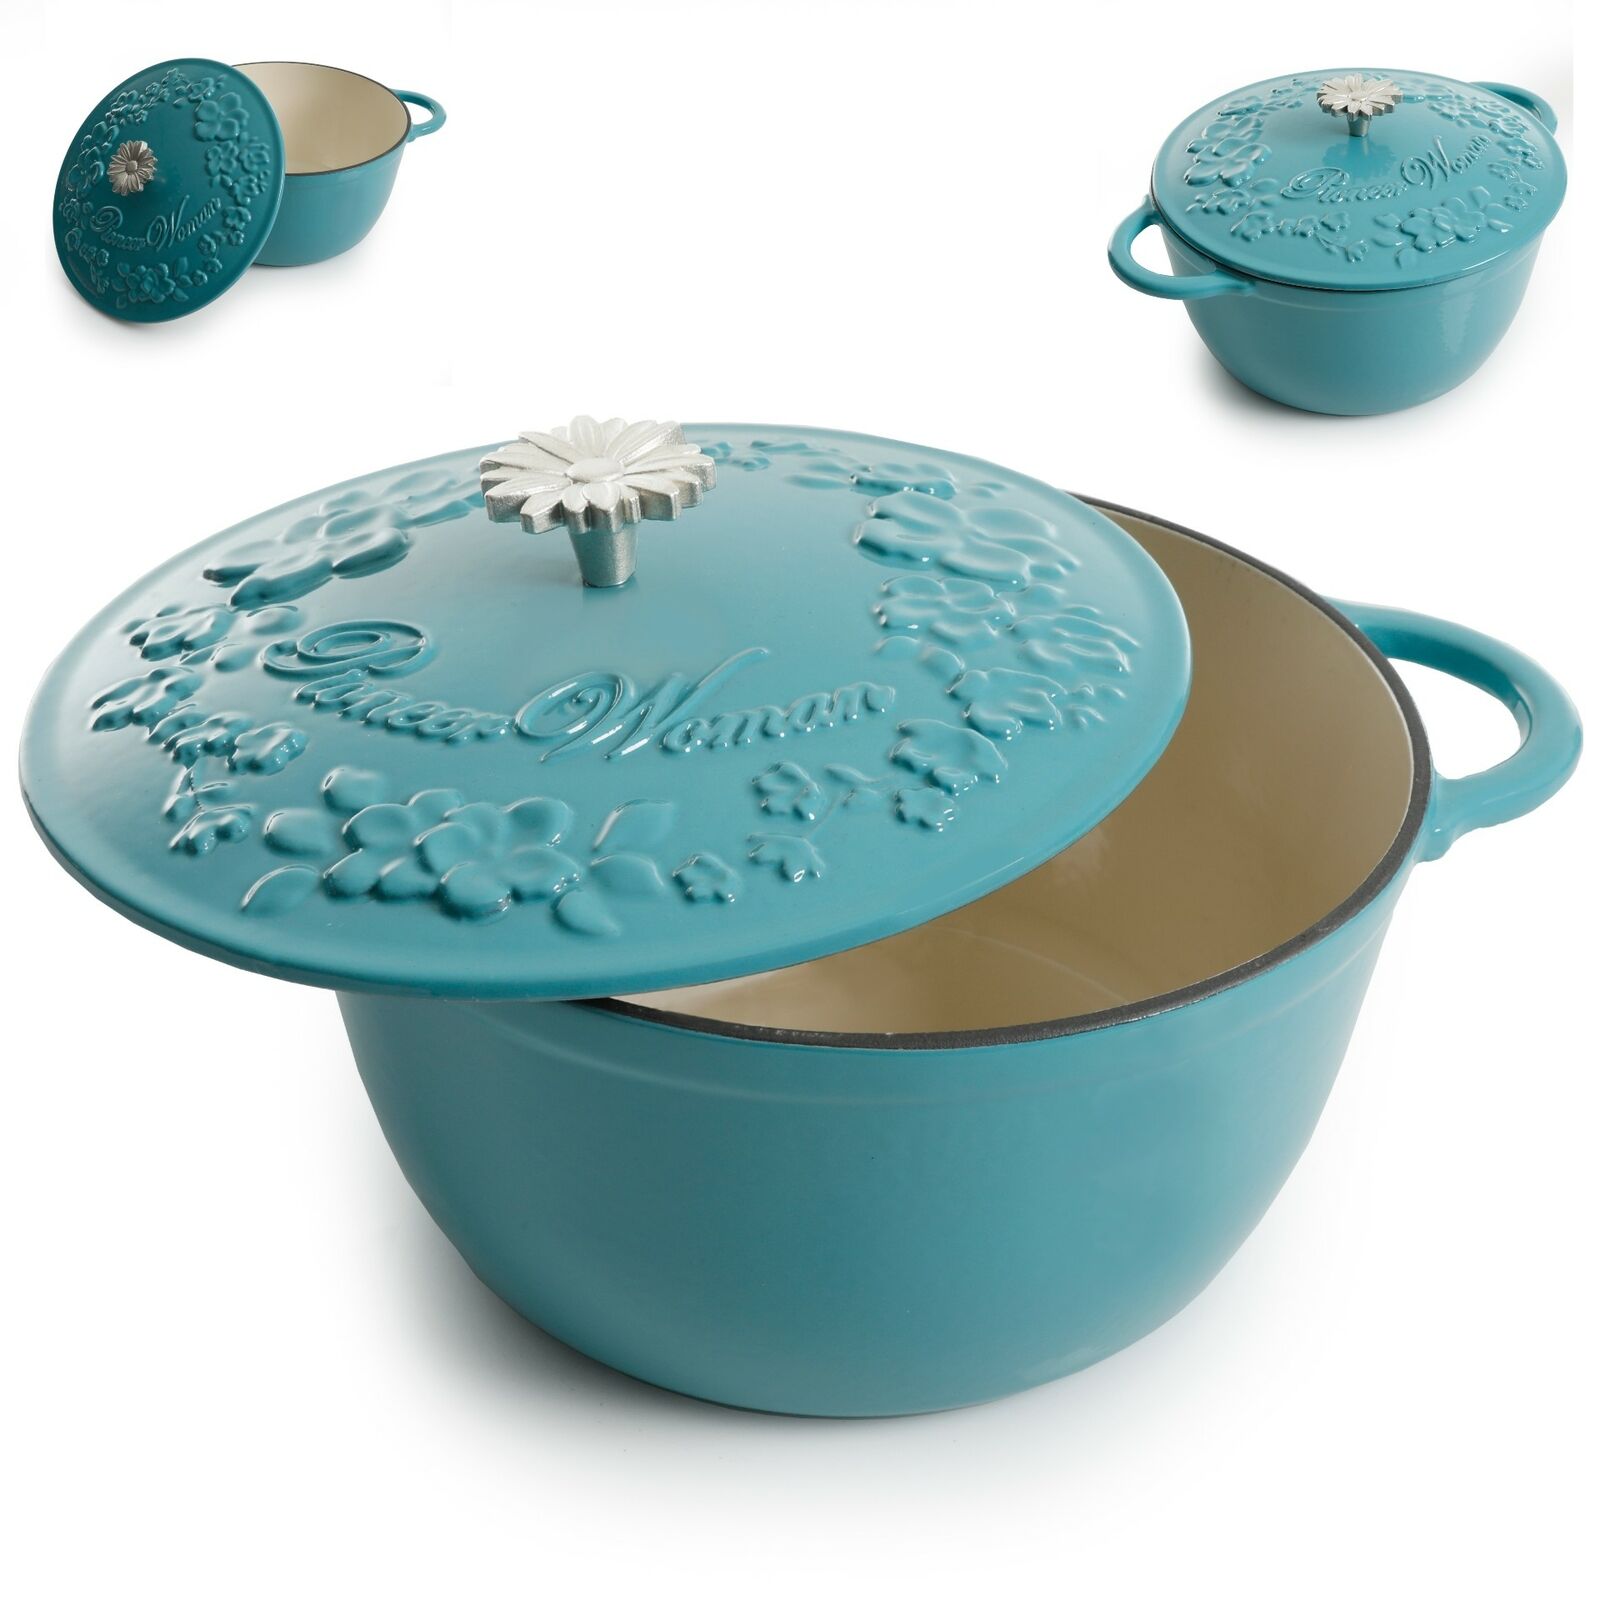 5 Quart Enameled Cast Iron Dutch Oven Floral Turquoise Kitchen Cooking Cookware